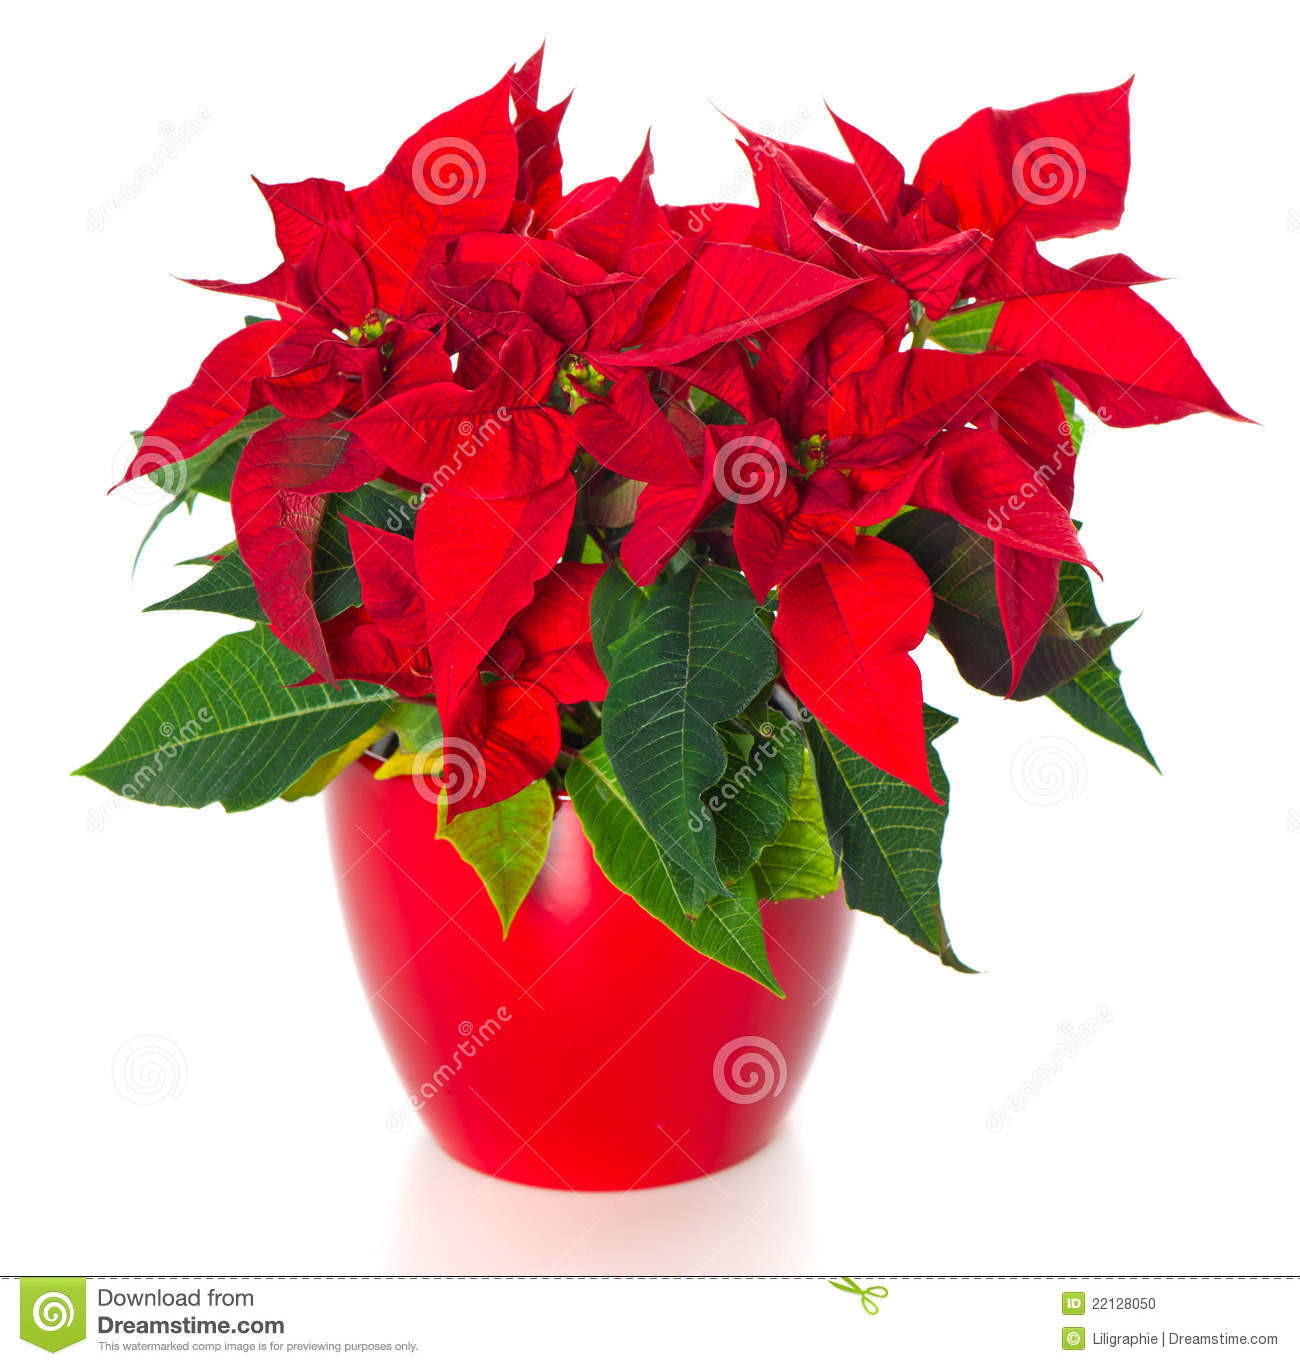 Red Christmas Flower
 Beautiful Poinsettia Red Christmas Flower Stock